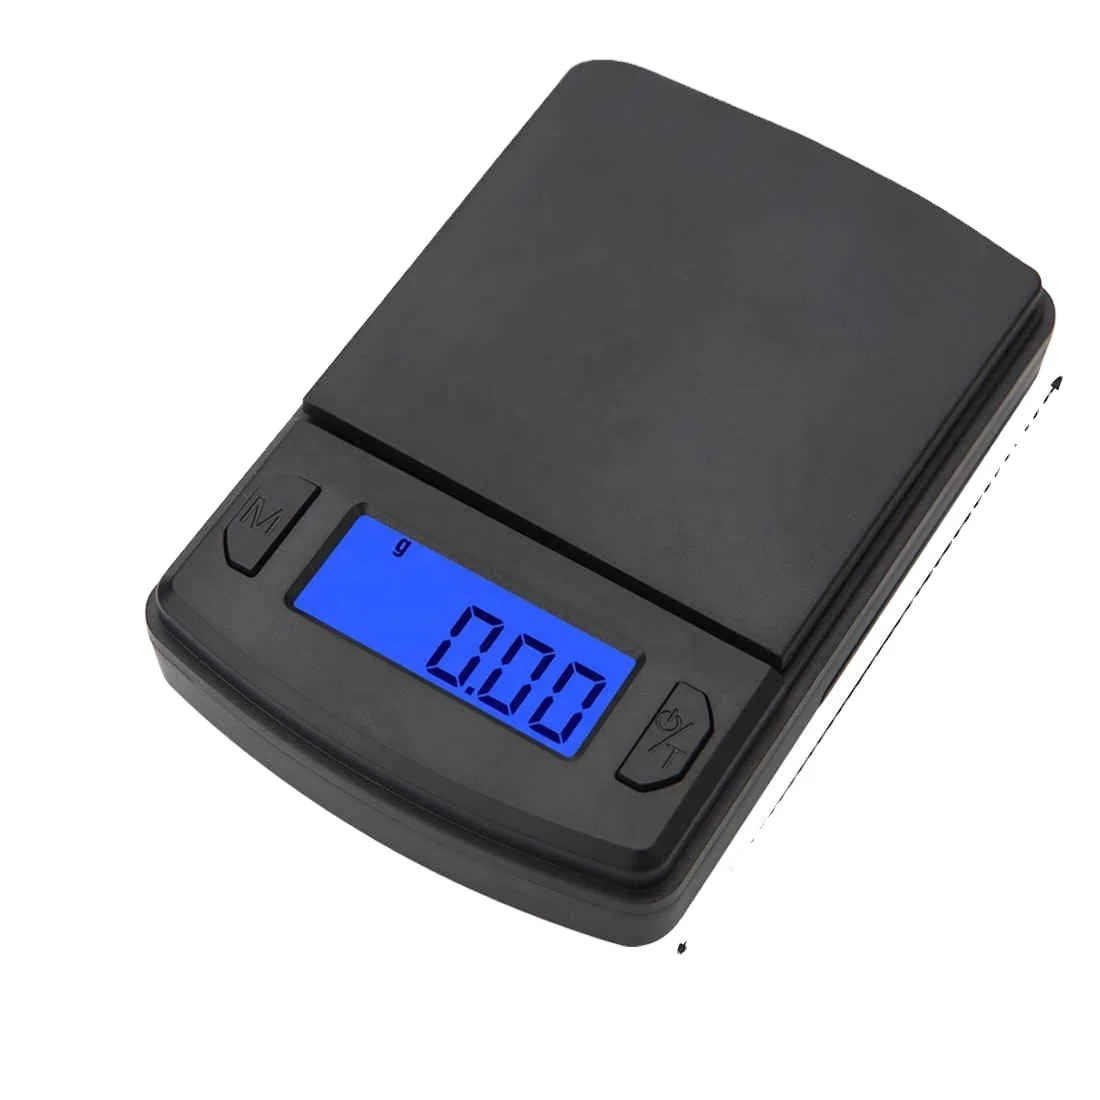 Mini Portable Digital Pocket Electronic Jewelry Scale Gold Balance Weight Scale 